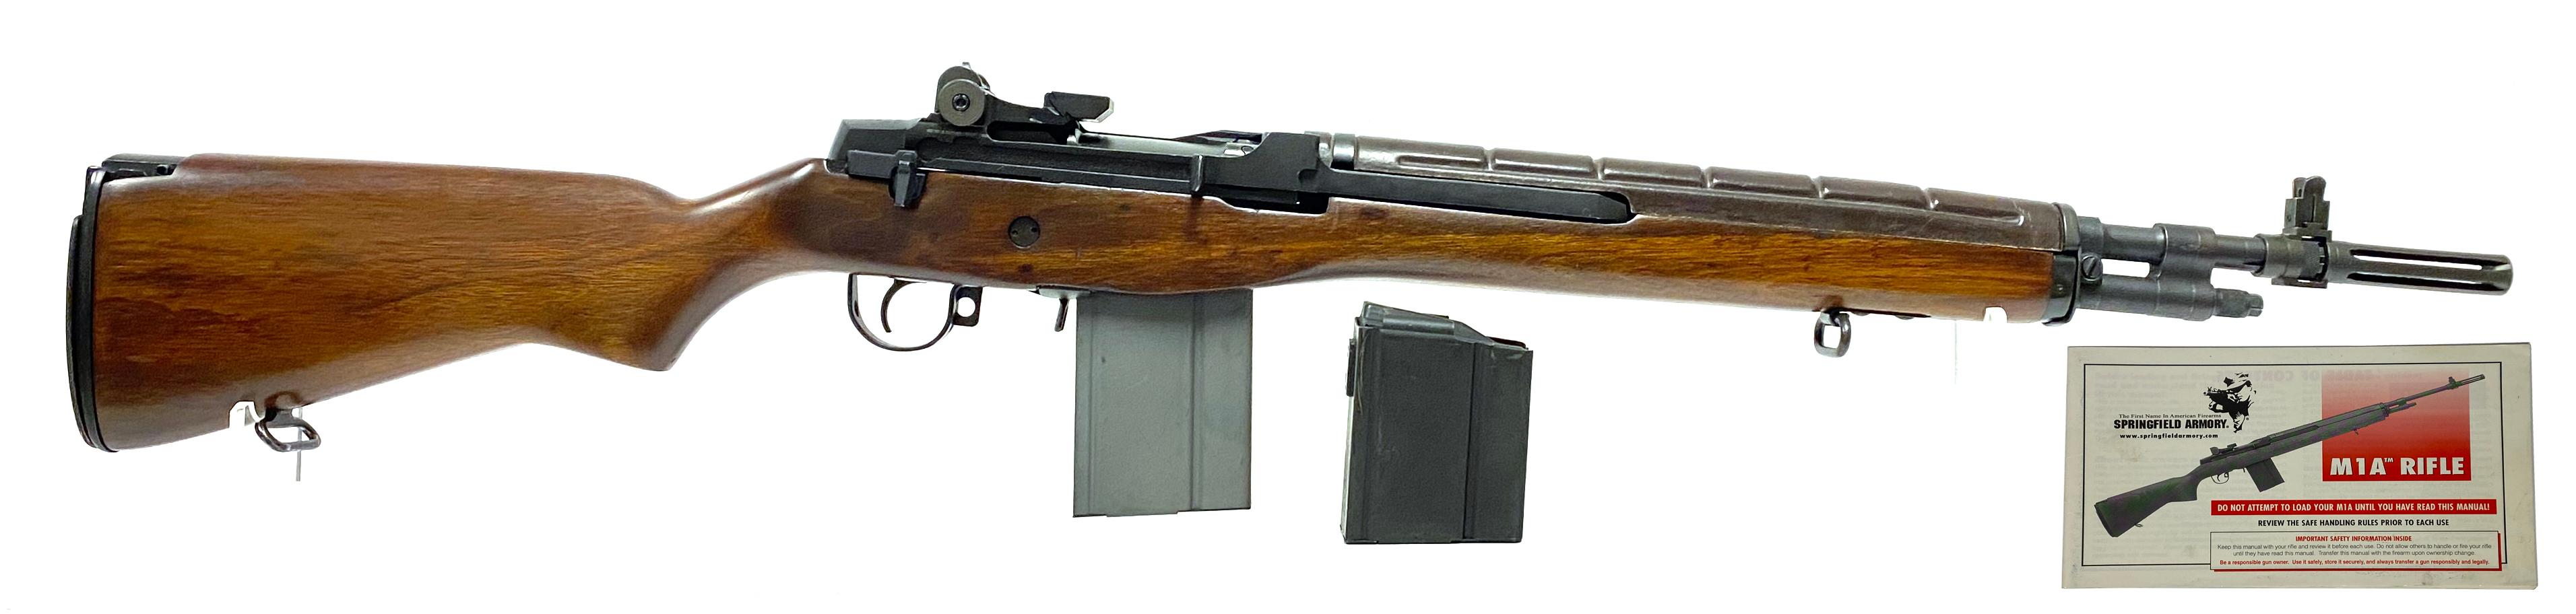 Excellent US Springfield Armory M1A 7.62x51mm Semi-Automatic Magazine Rifle w/ Manual